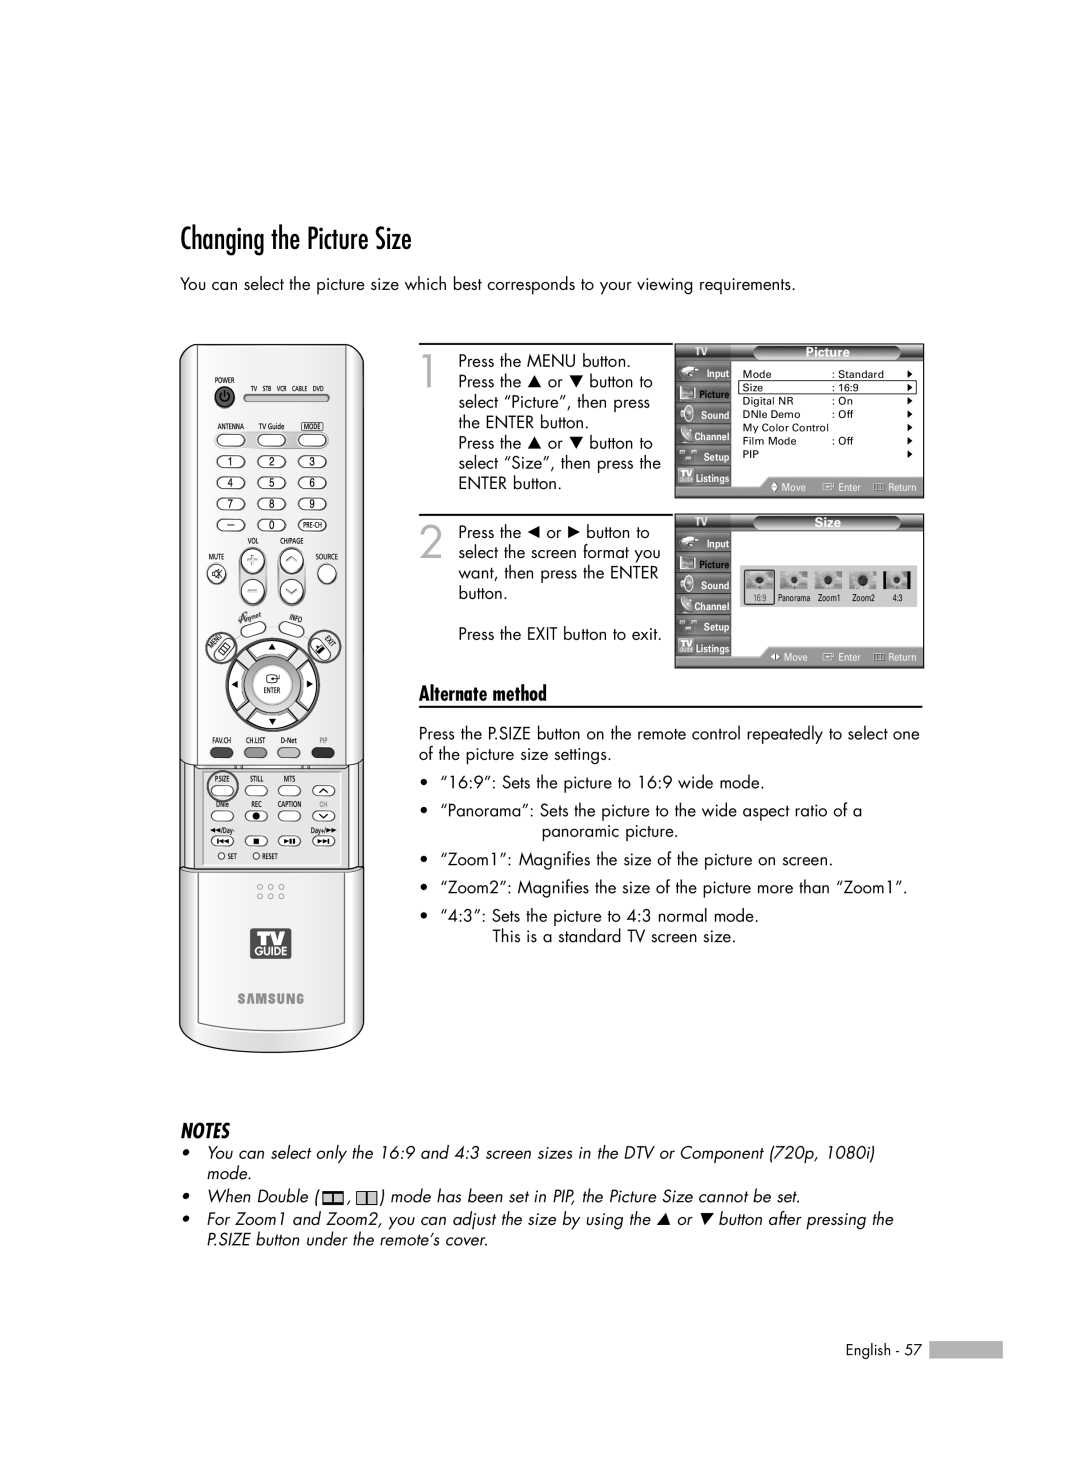 Samsung HL-R6178W, HL-R5678W, HL-R7178W manual Changing the Picture Size, Alternate method, Notes 